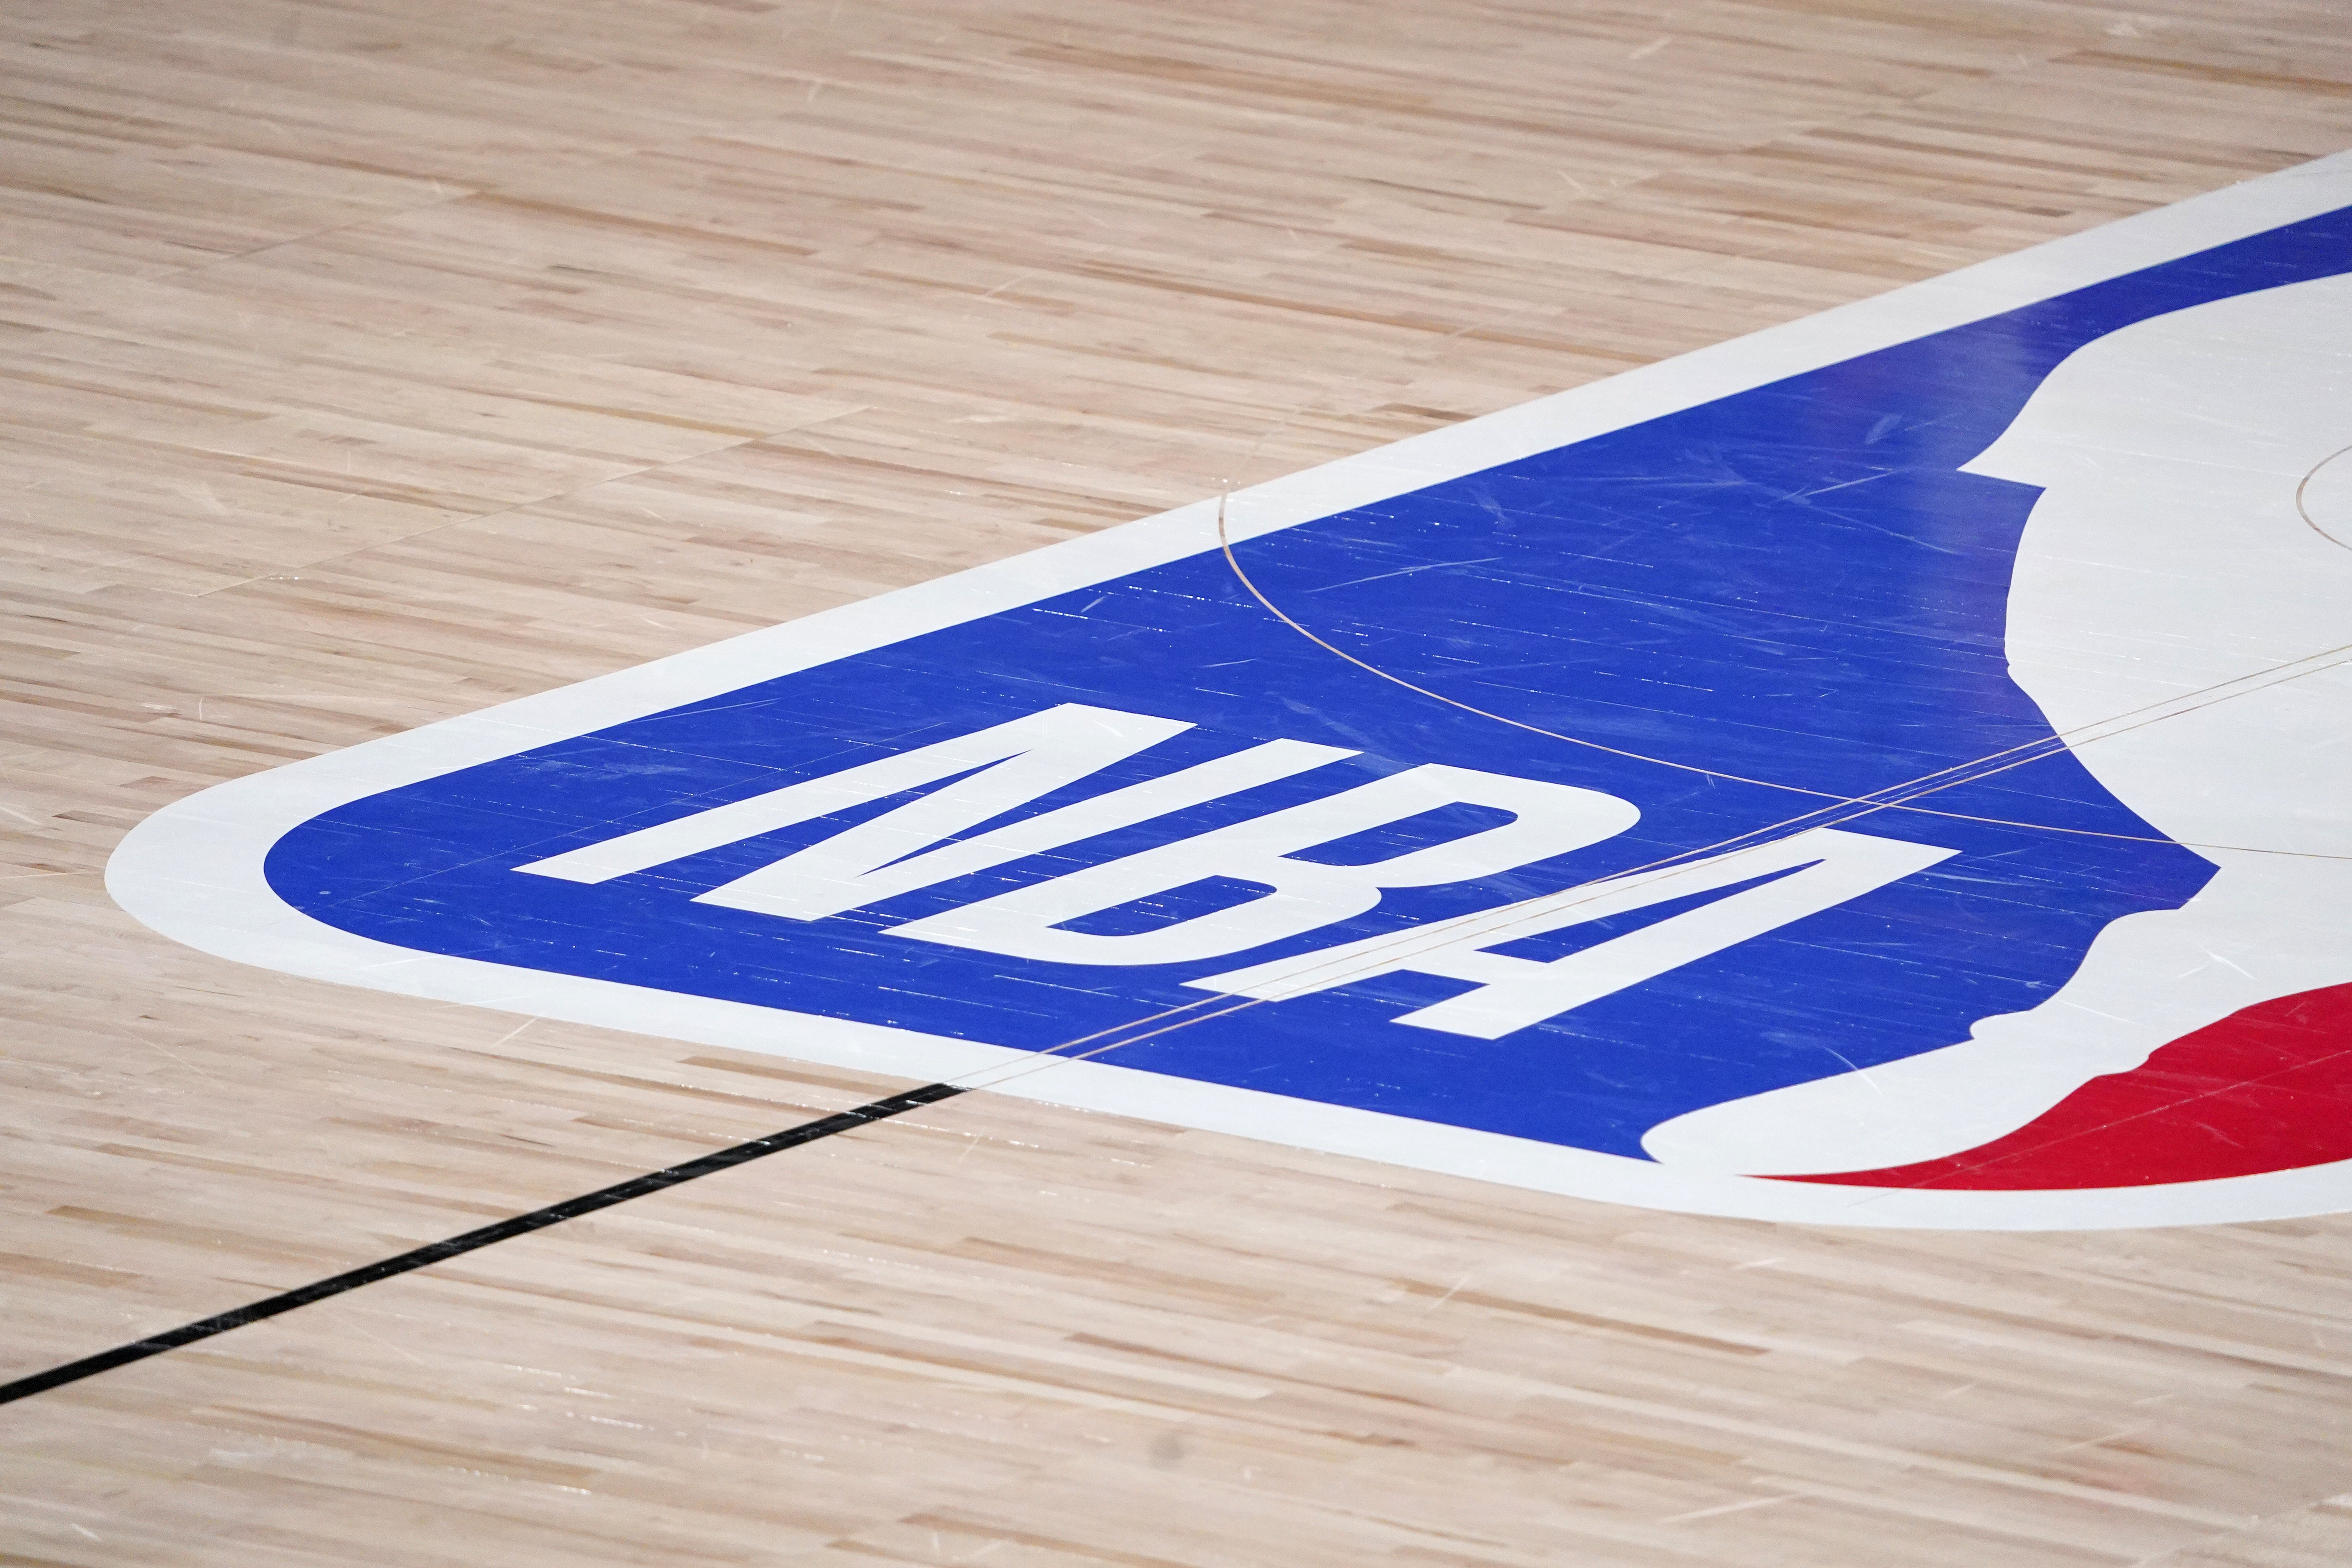 Nba 2022 2023 Schedule Release Date Nba Schedule 2022: Regular Season, Playoffs, Finals And Key Dates  Reportedly Revealed | Bleacher Report | Latest News, Videos And Highlights